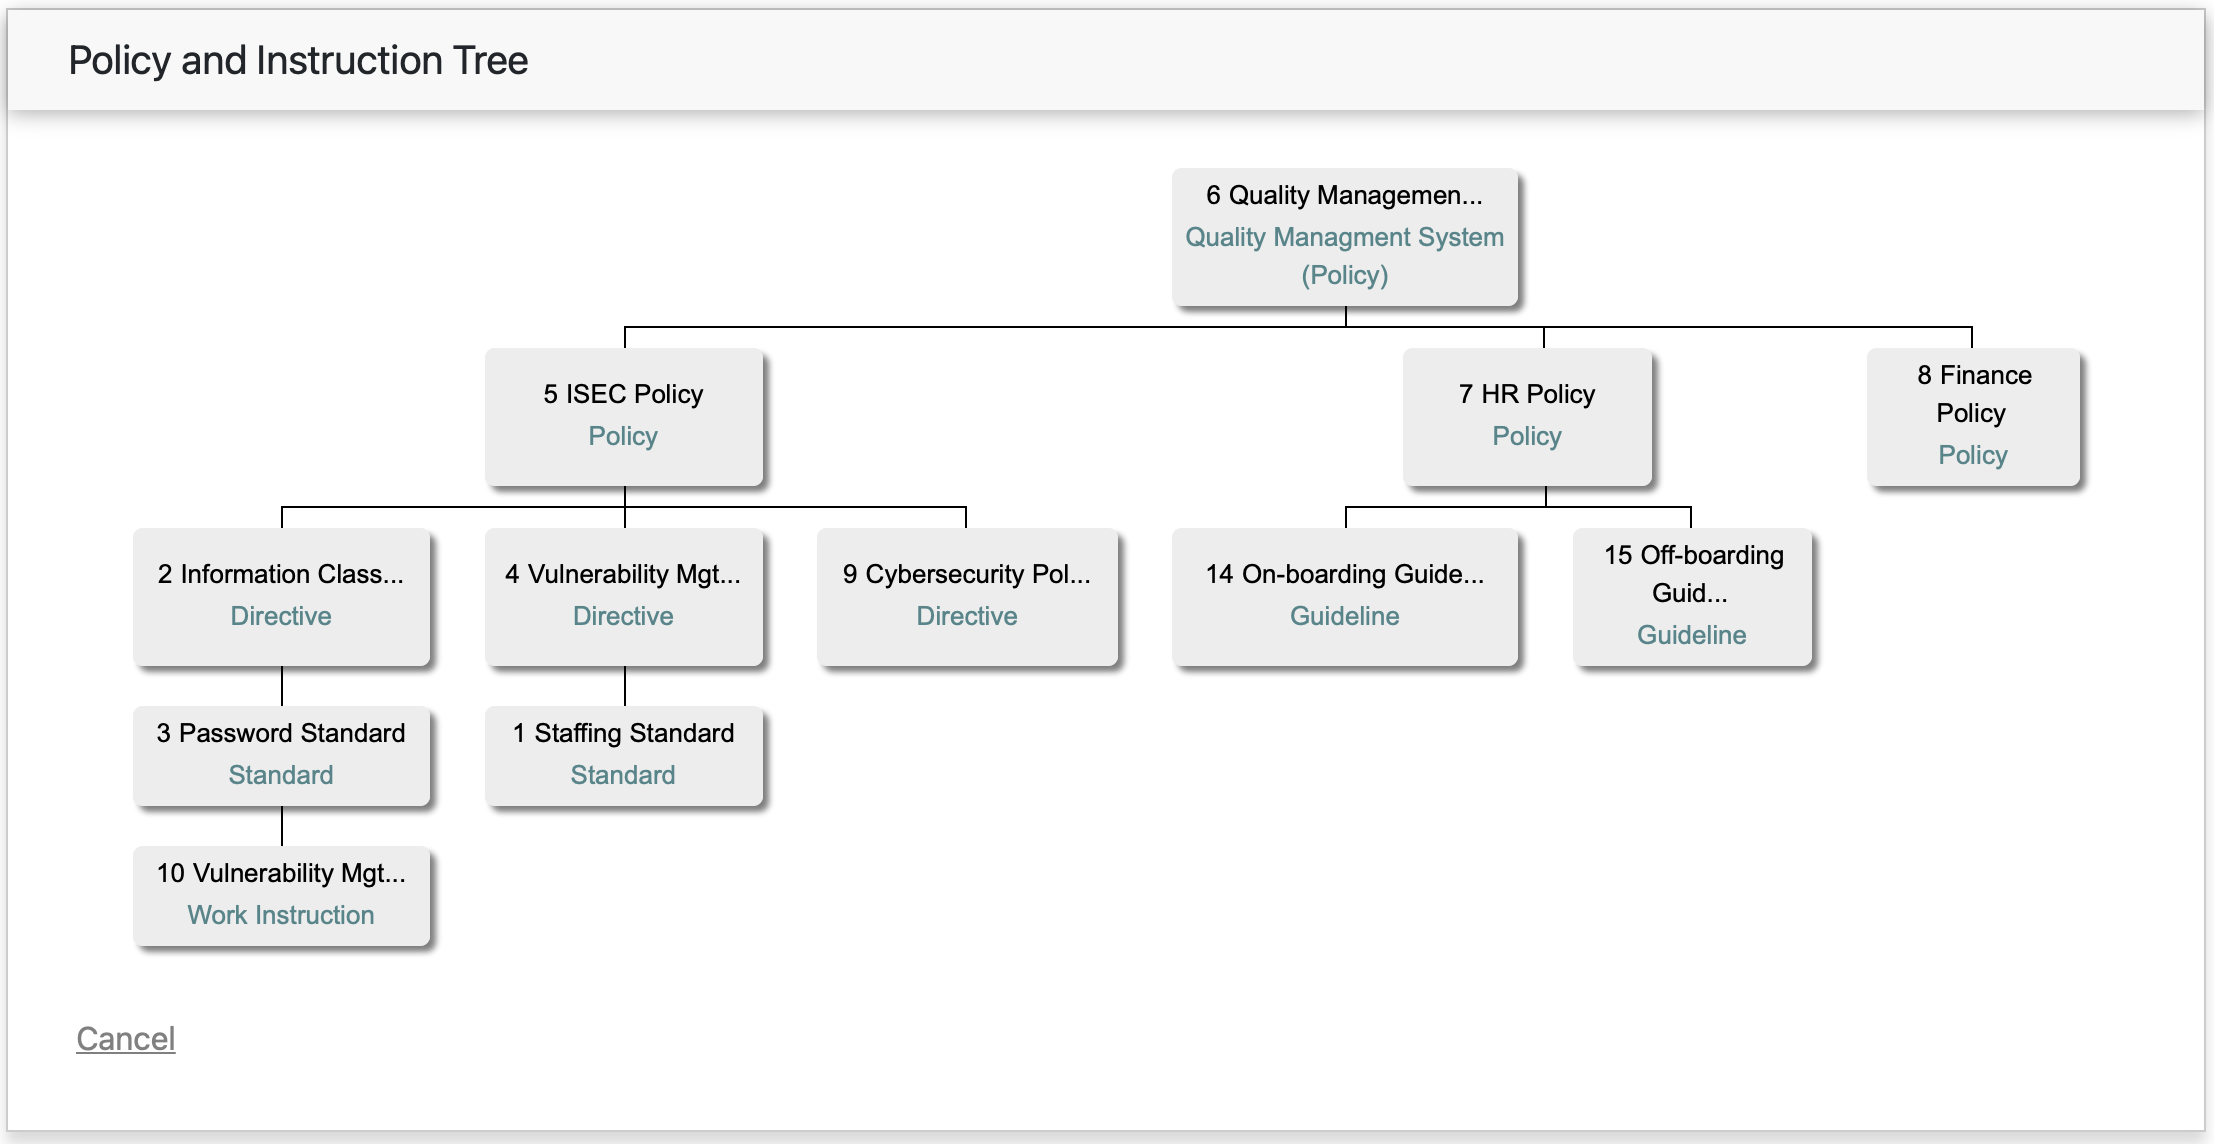 Policy Tree built from documents